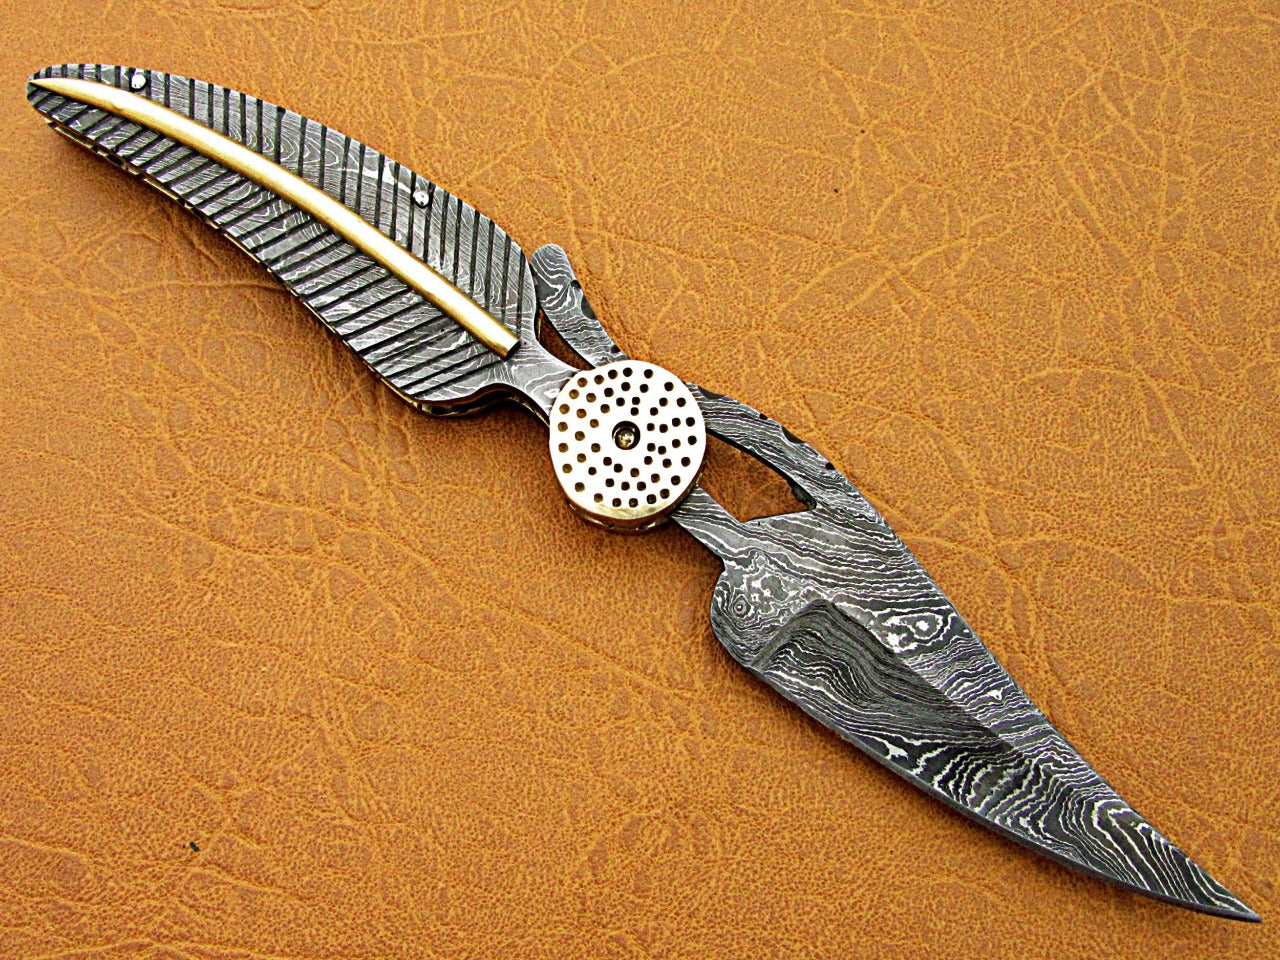 8" hand forged Damascus steel leaf folding pocket knife custom made, Engraved Damascus scale with bras art work cow leather sheath